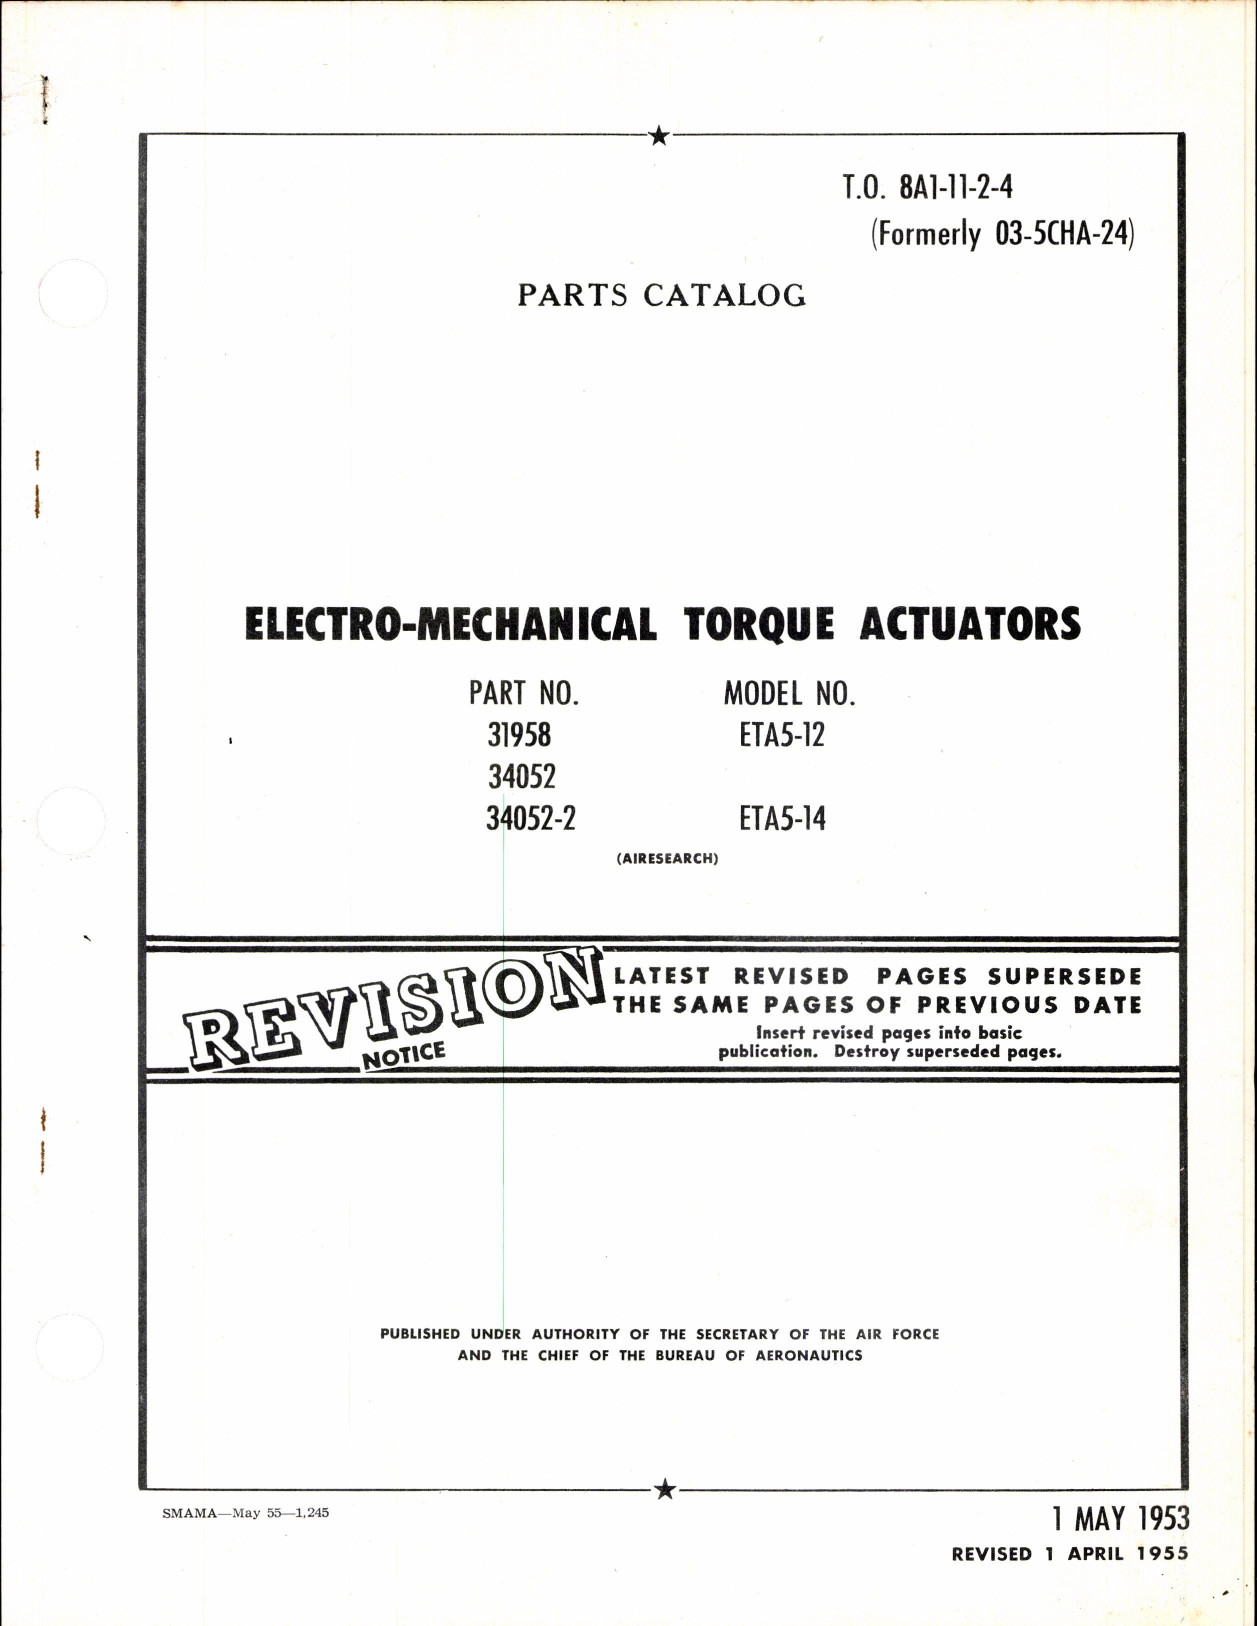 Sample page 1 from AirCorps Library document: Parts Catalog for Electro-Mechanical Torque Actuators